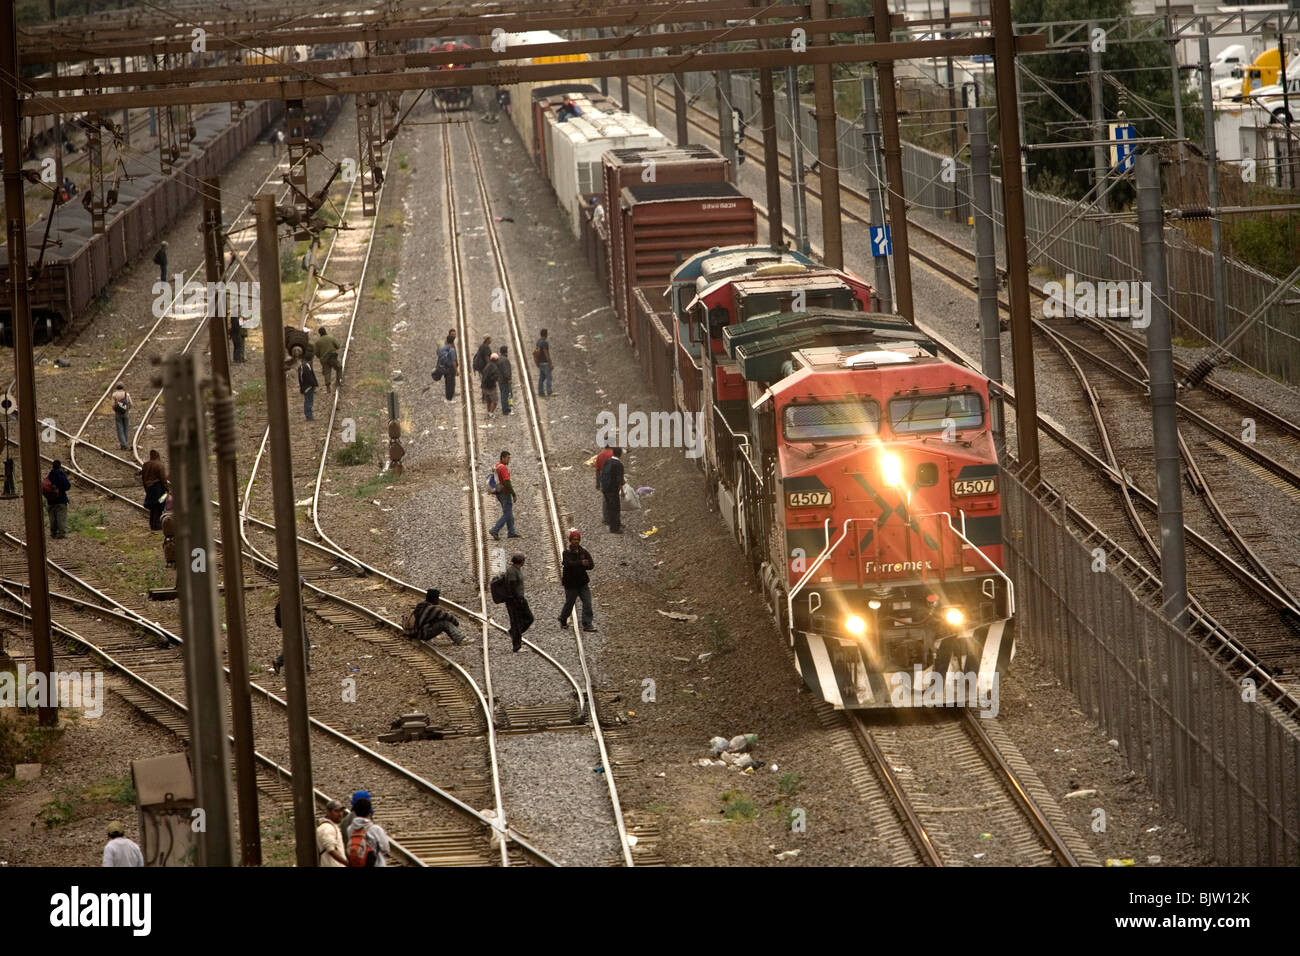 Undocumented Central American migrants traveling across Mexico to work in the United States jump a train in Mexico City, Mexico, Stock Photo